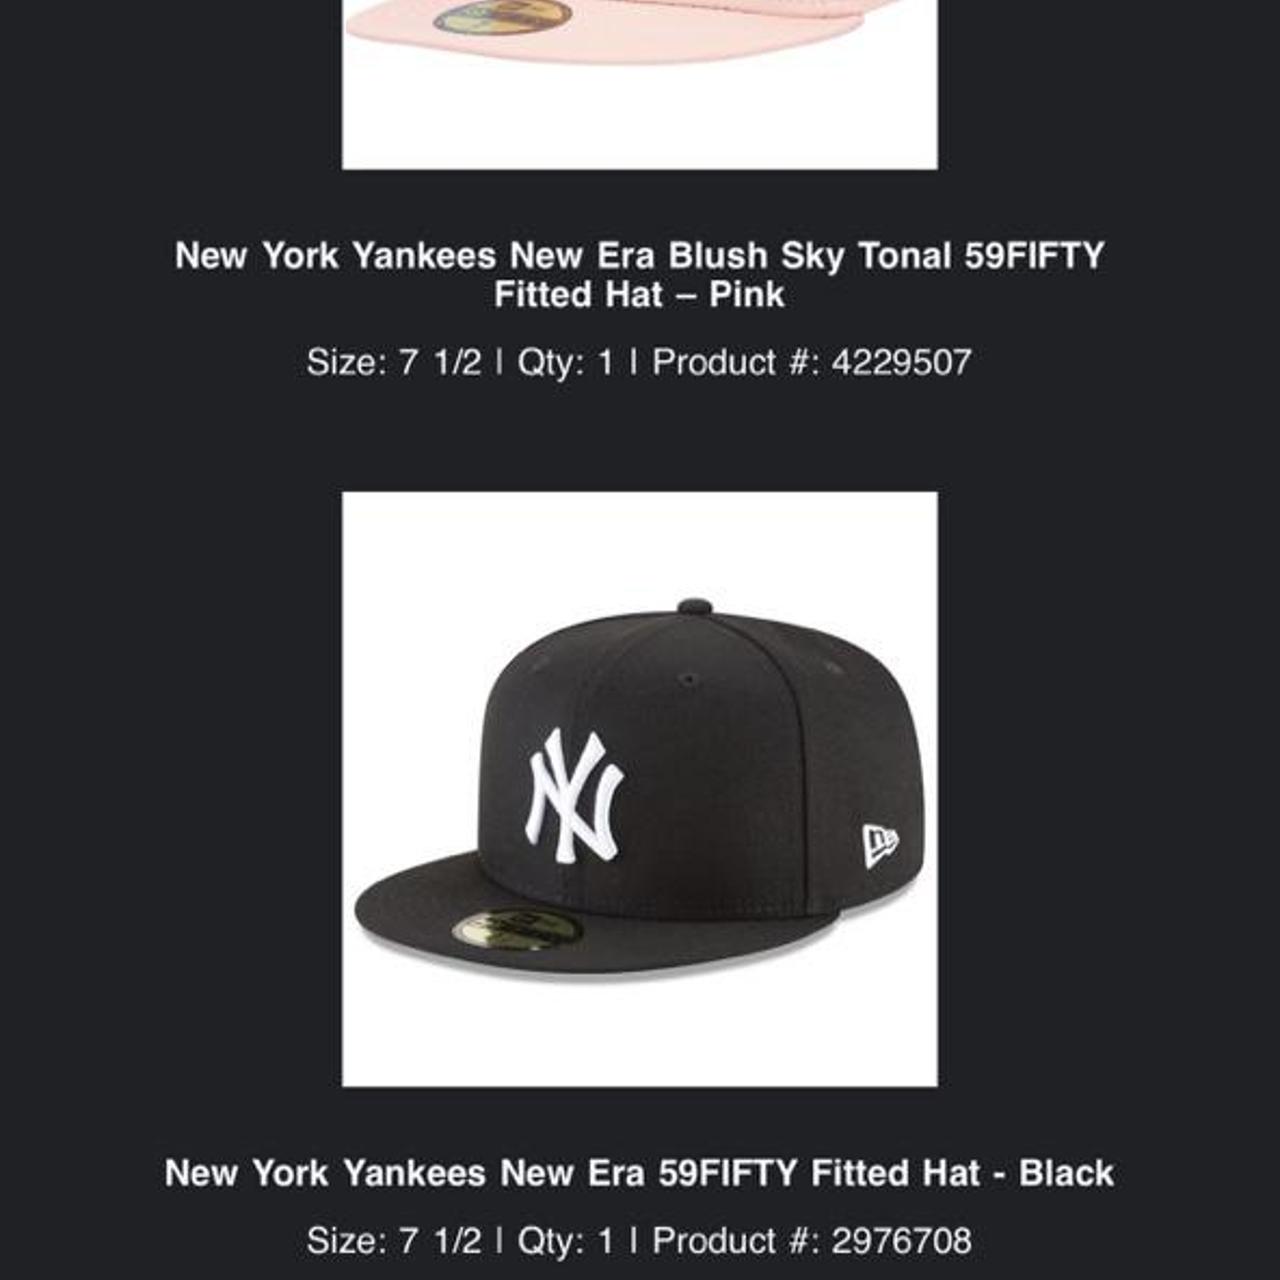 New York Yankees New Era Blush Sky Tonal 59FIFTY Fitted Hat - Pink